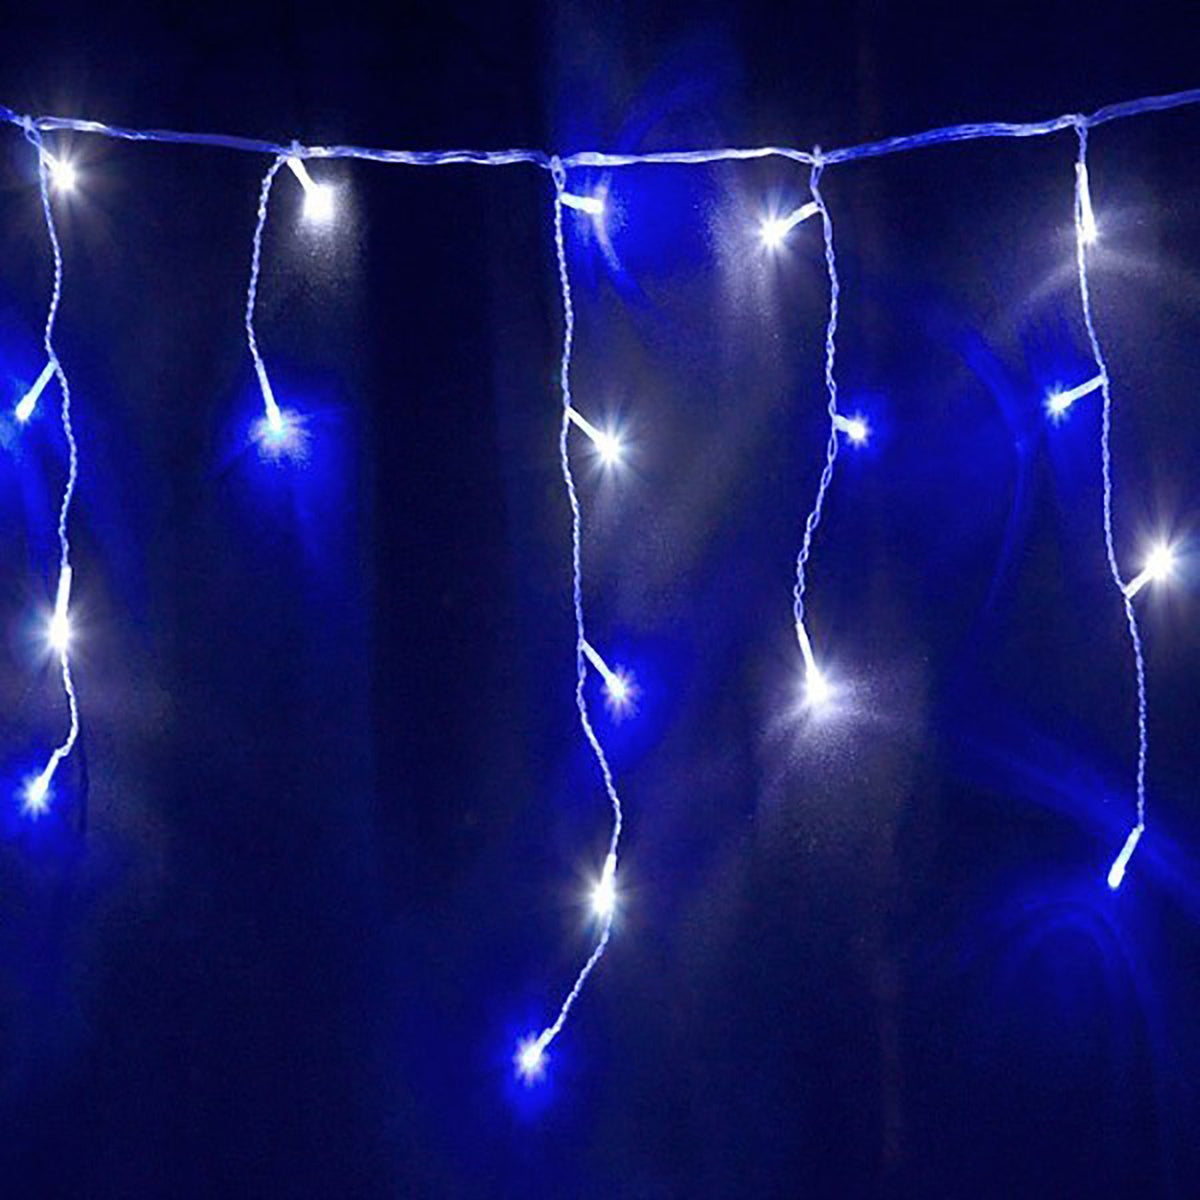 Noma Christmas 240, 360, 480, 720, 960 Snowing Icicle LED Lights with White Cable- White/ Ice Blue